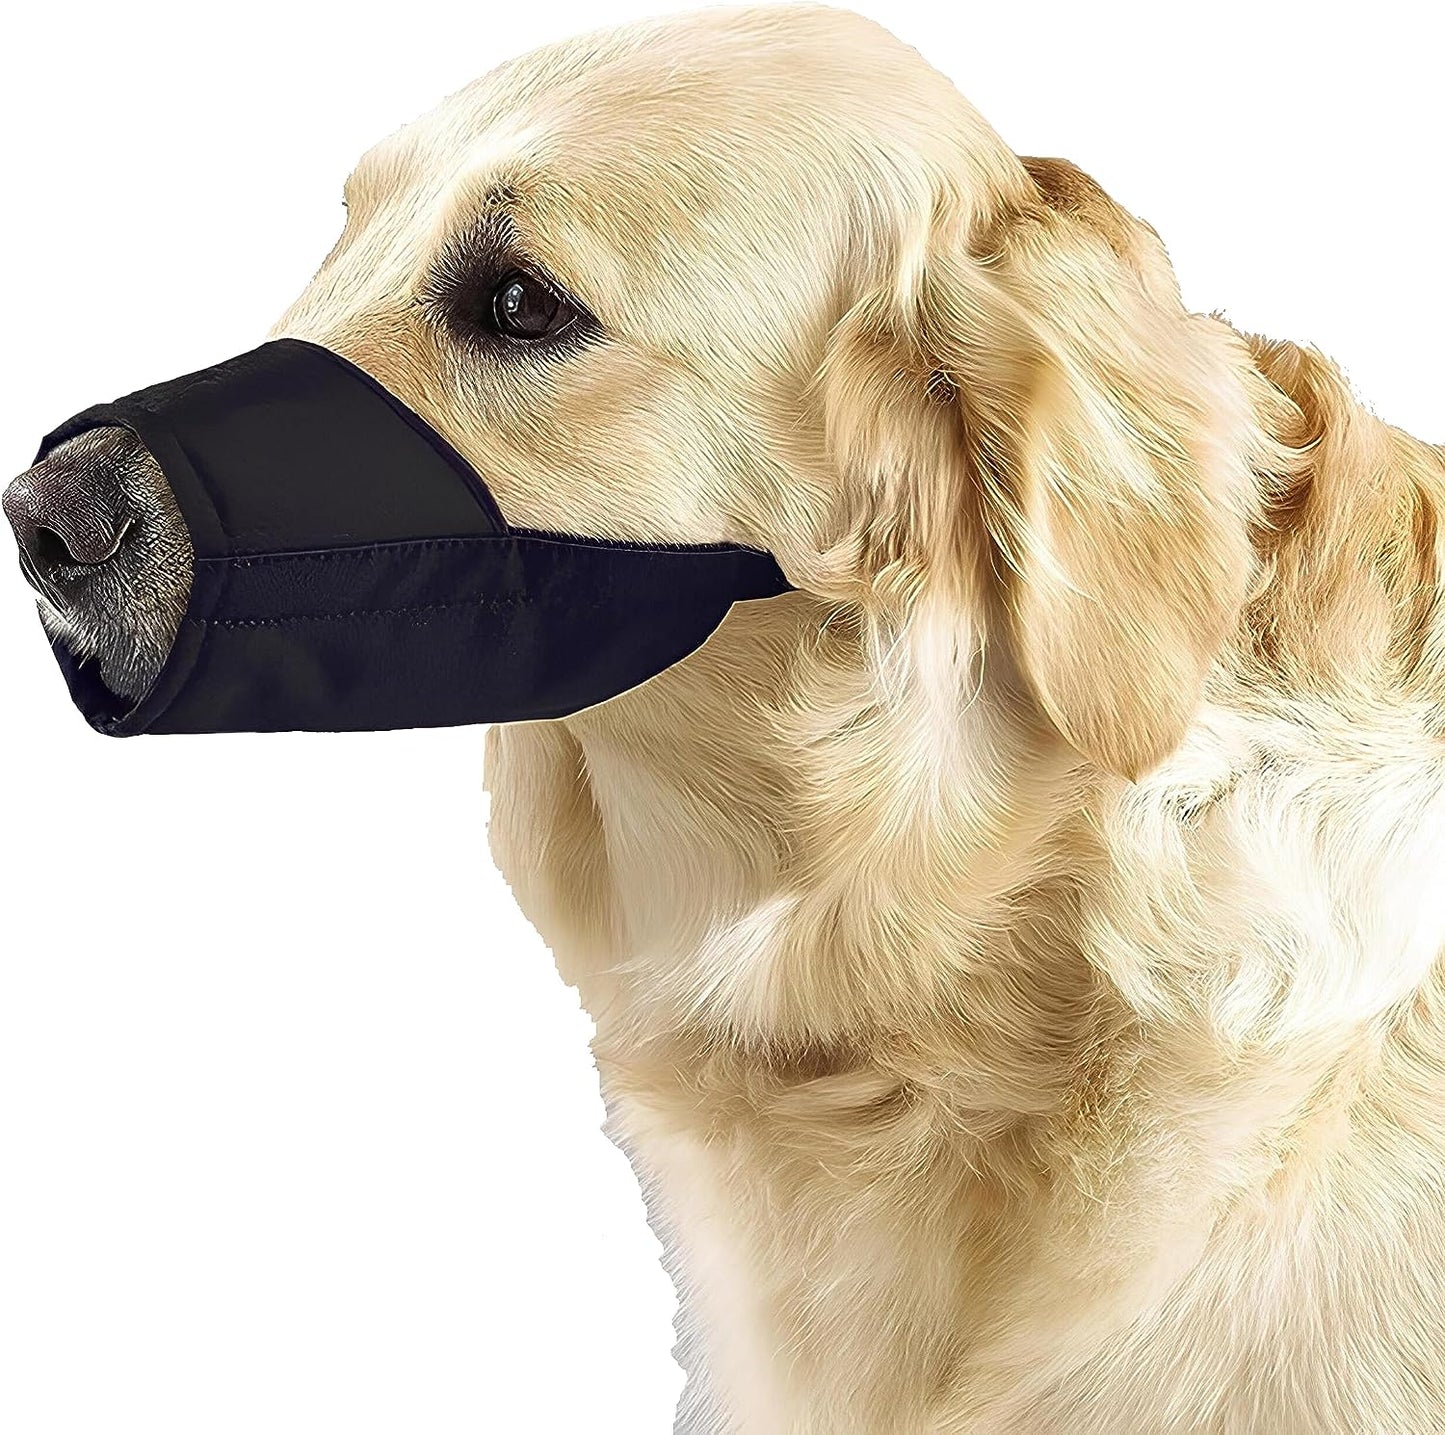 New Dog Muzzle, Soft Nylon Print Muzzle Air Mesh Breathable Adjustable Loop Pattern Pets Muzzles for Small Medium Large Dogs,Stop Biting Barking and Chewing (Black, Medium)